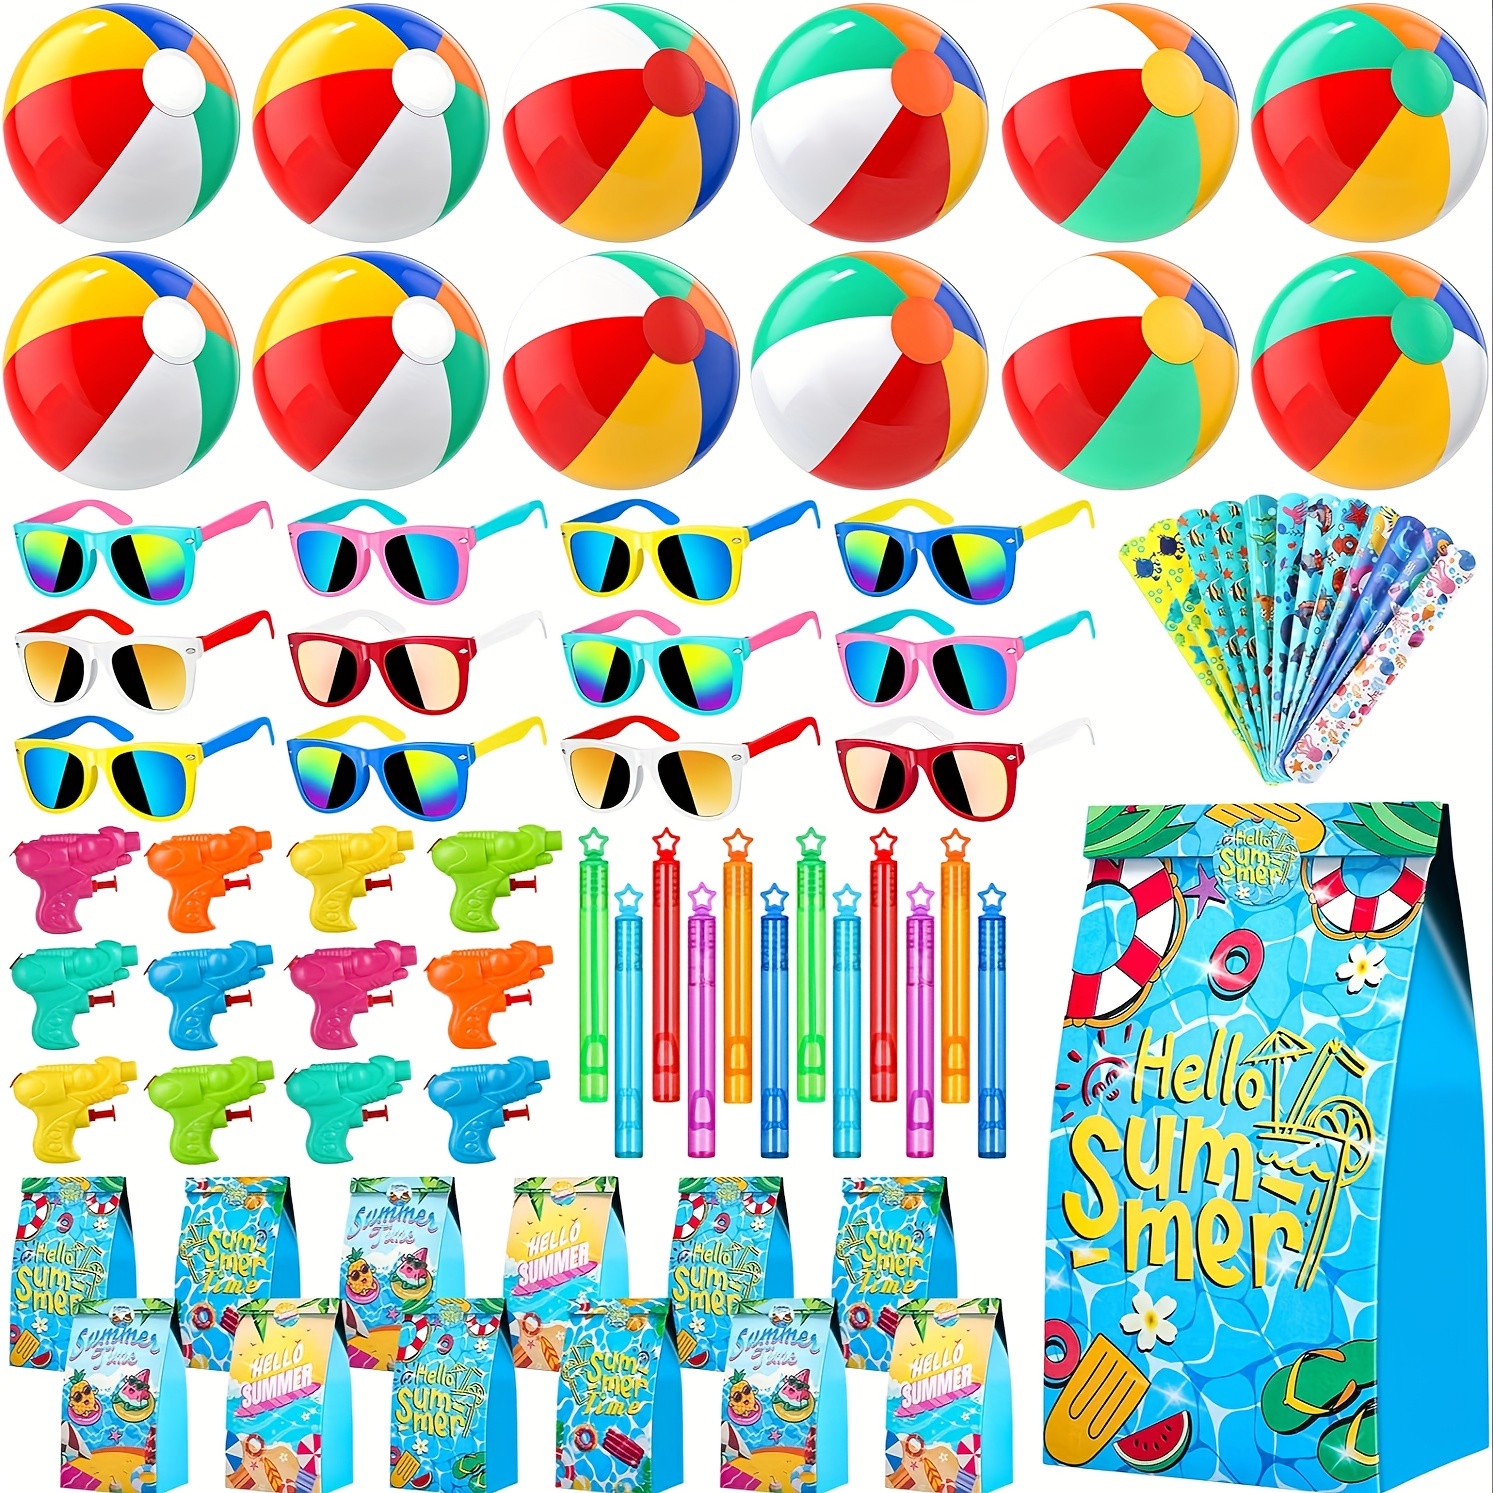 

Pool Party Favors And Beach Party Favors - 72 Pcs Party Bag Stuffers For Kids Including Beach Balls, Kids Sunglasses Bulk, Bubble Wands, And More For Beach Pool Party Favors, Birthday Party Supplies